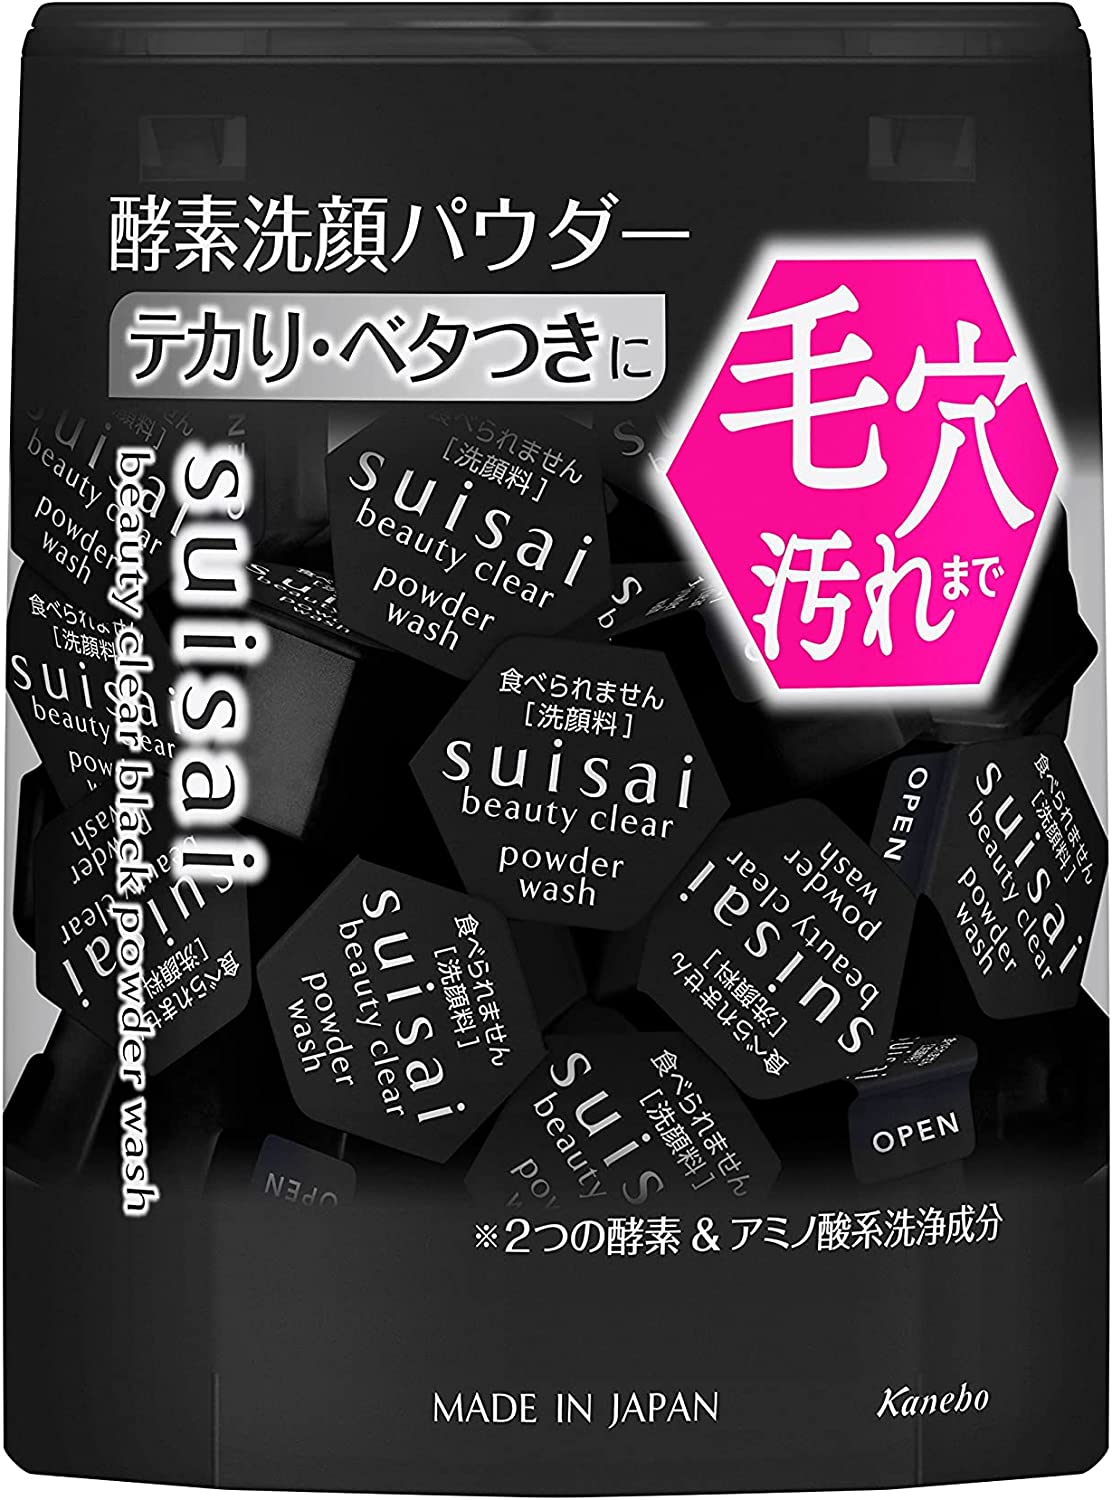 Kanebo Suisai Beauty Clear Black Face Wash Powder 0.4g - 32pieces - Harajuku Culture Japan - Japanease Products Store Beauty and Stationery